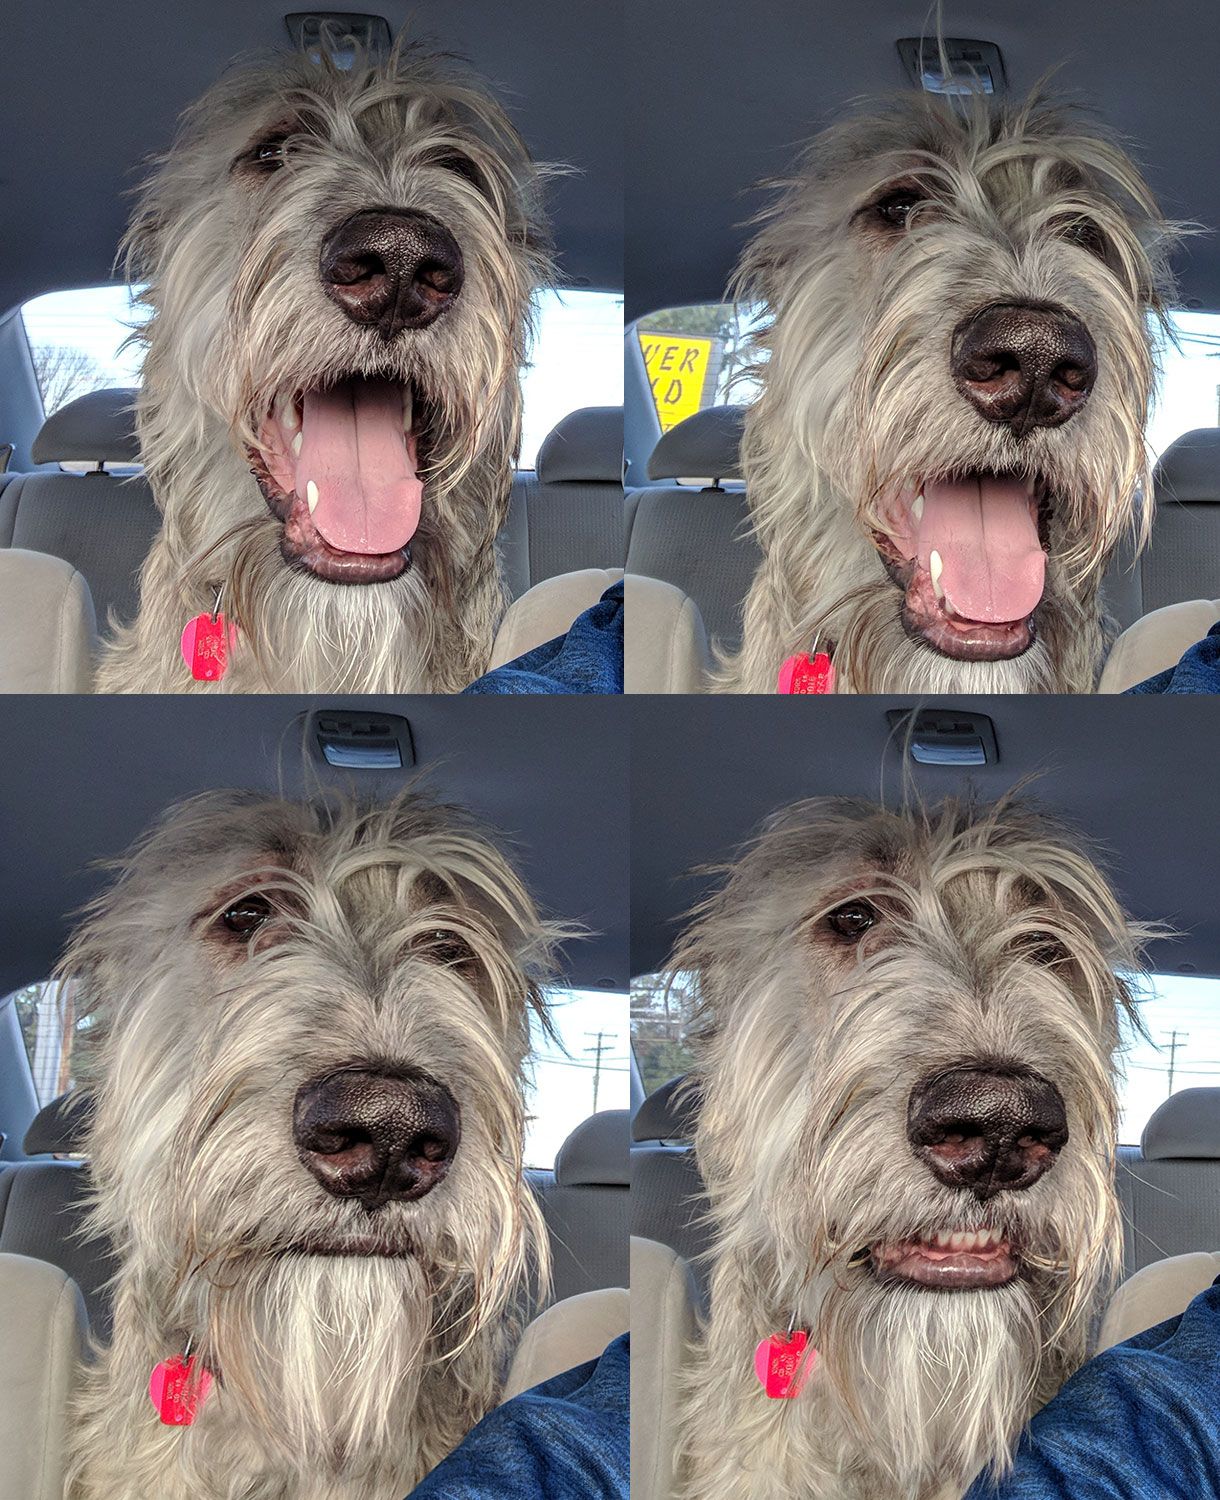 My dog's facial expressions when I didn't turn towards the dog park.